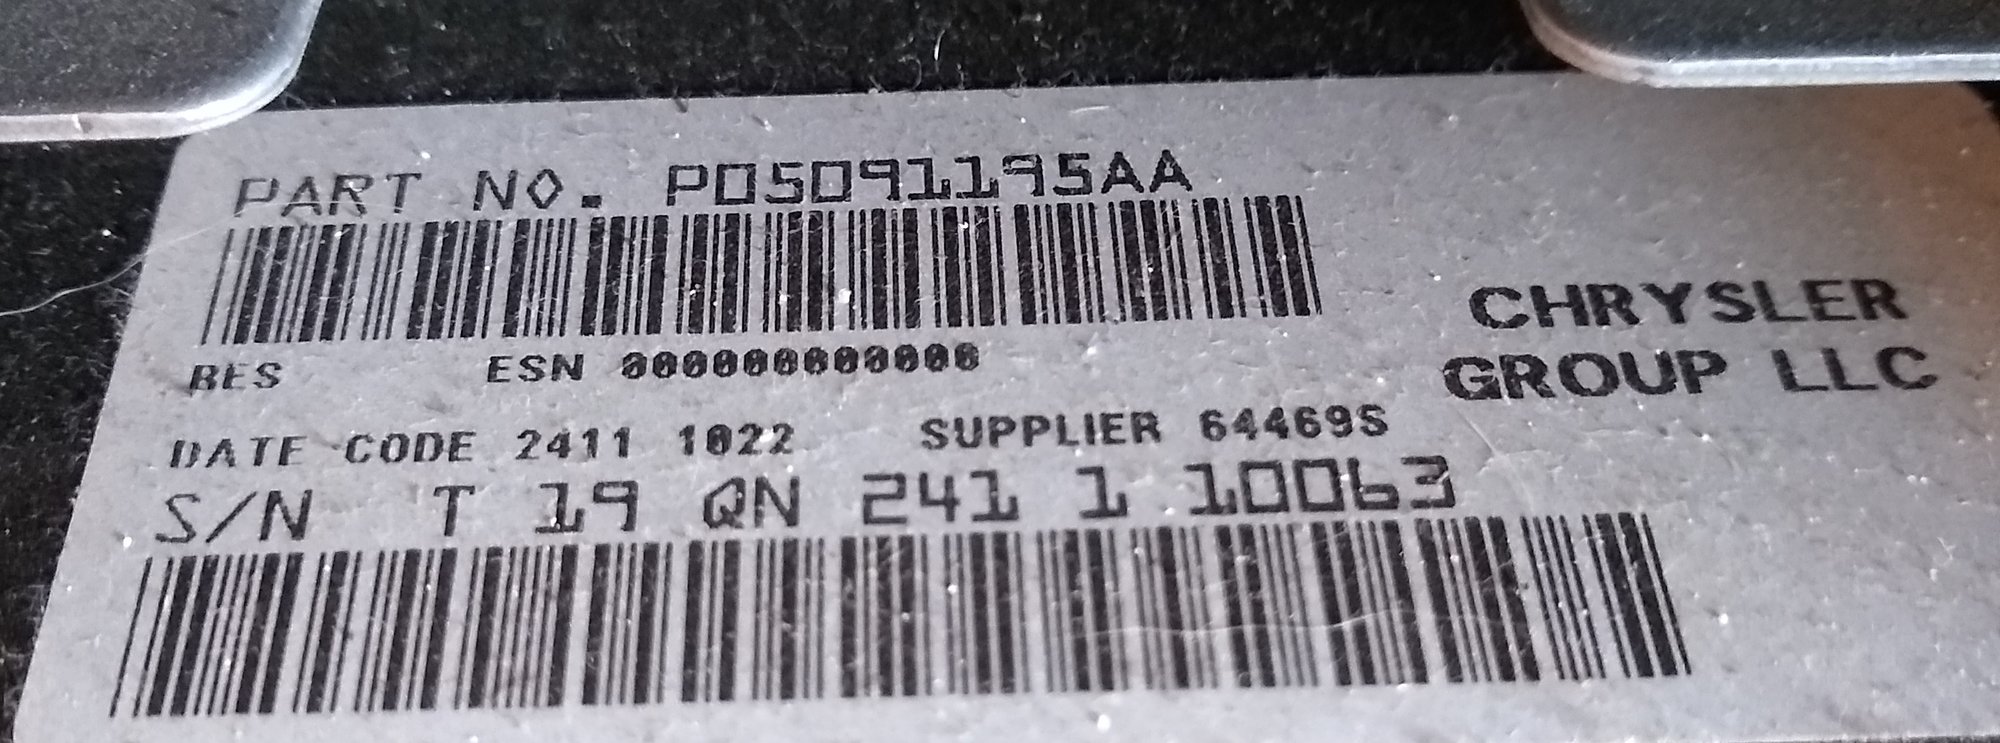 chrysler radio codes from serial number